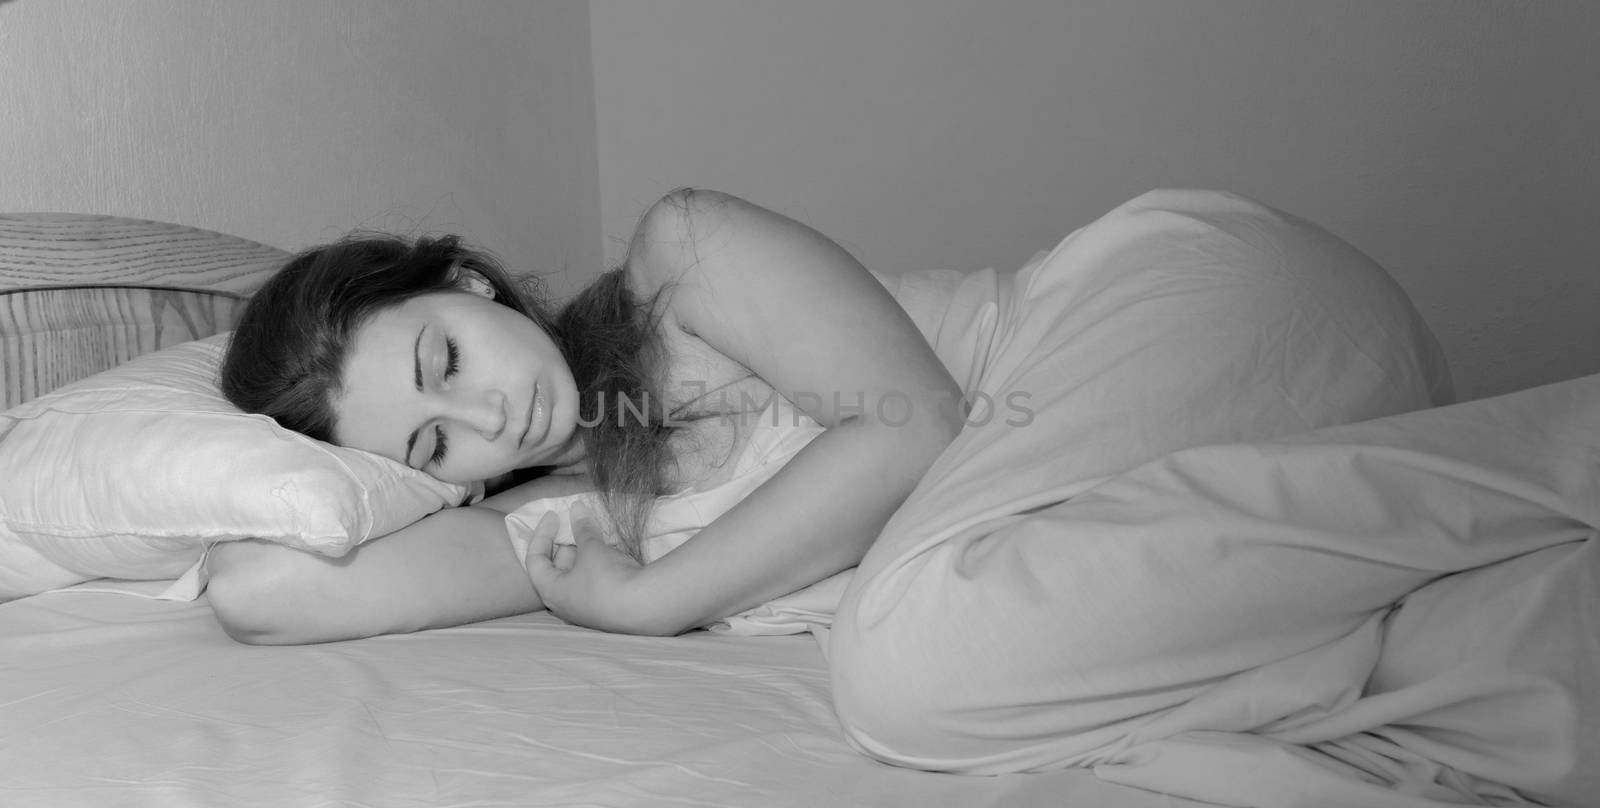 beautiful girl with long brown hair sleeping in the white bed in bw color